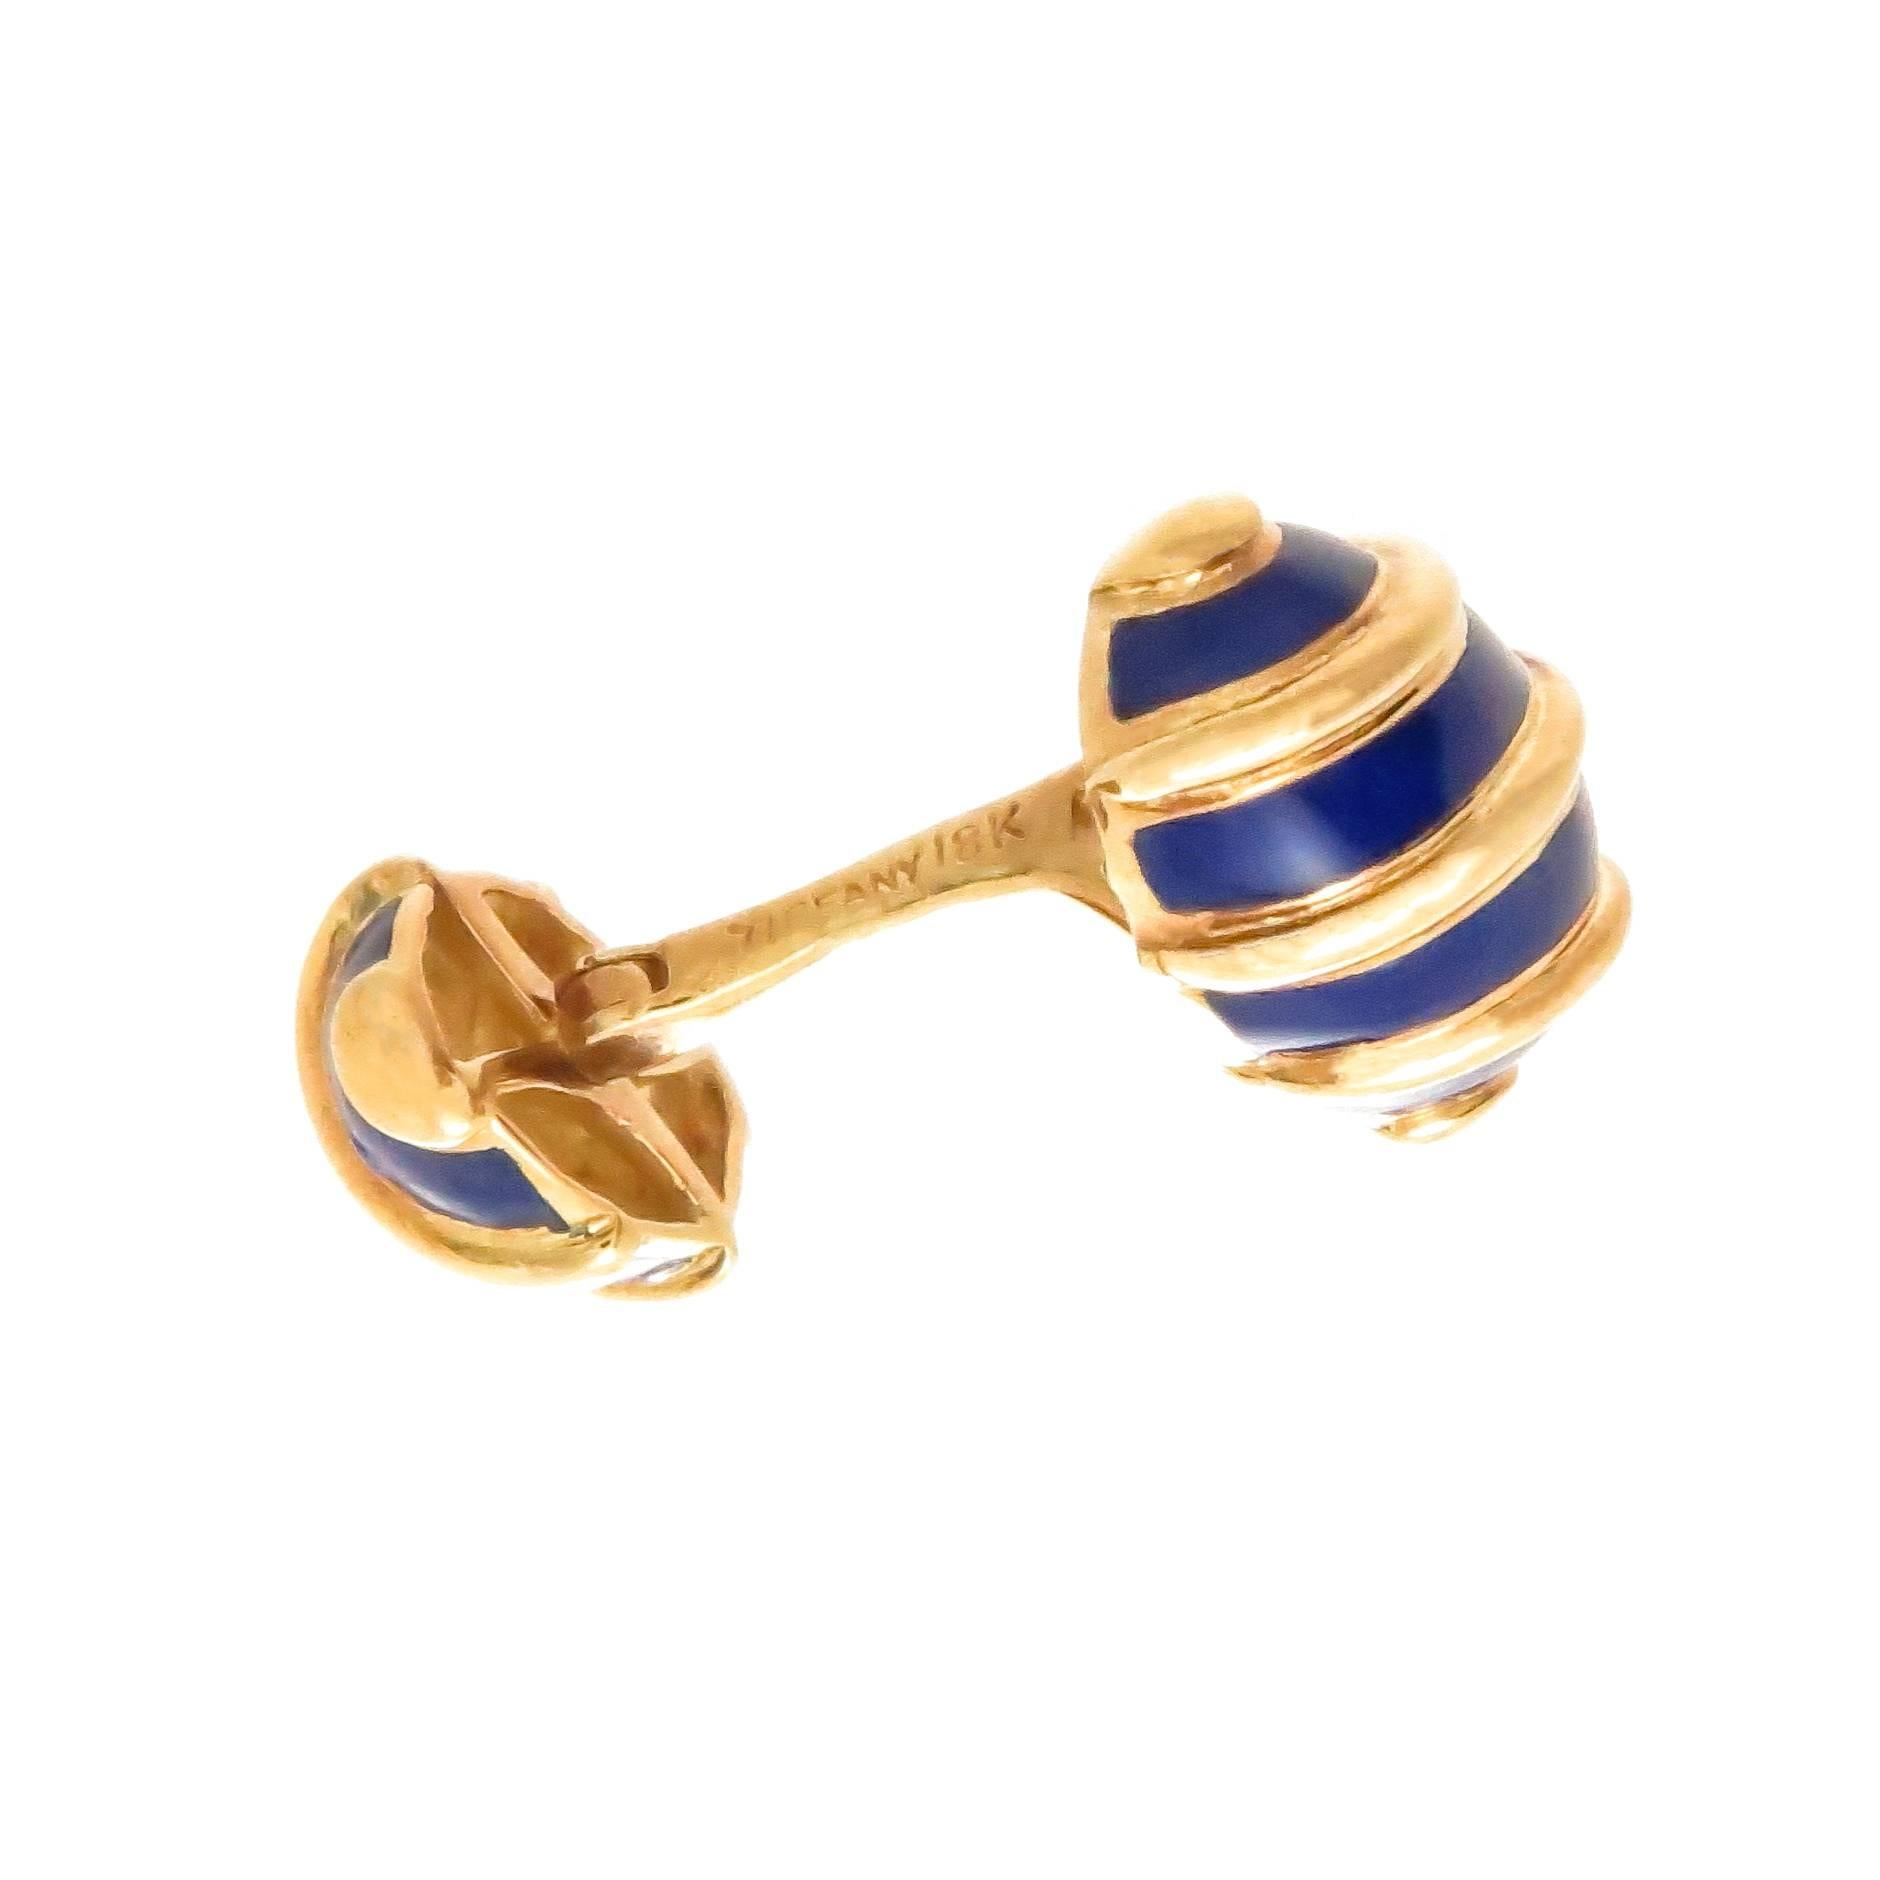 Circa 2000 Jean Schlumberger for Tiffany & Company  18K Yellow Gold and Cobalt Blue Enamel Cufflinks. The Oval Ribbed tops measure 5/8 X 3/8 Inch.